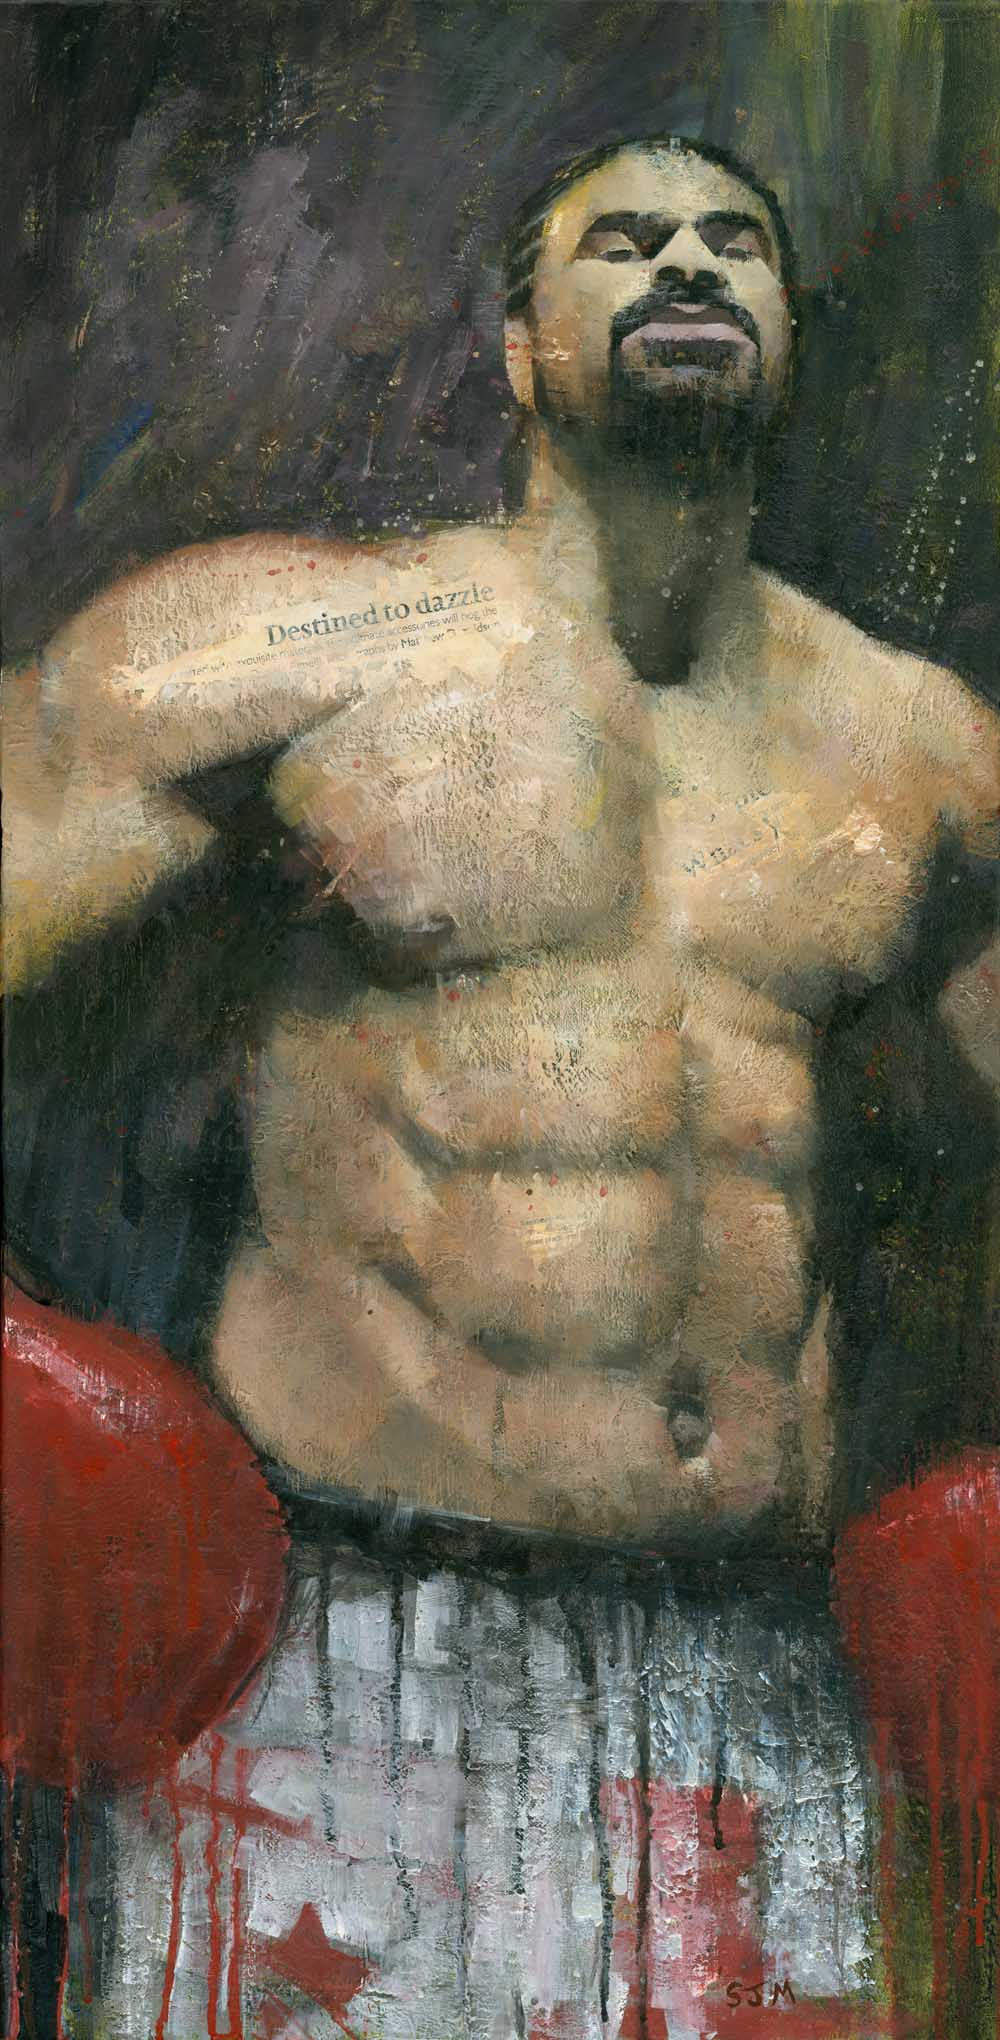 Male figure boxing painting of David Haye by Stephen Mitchell